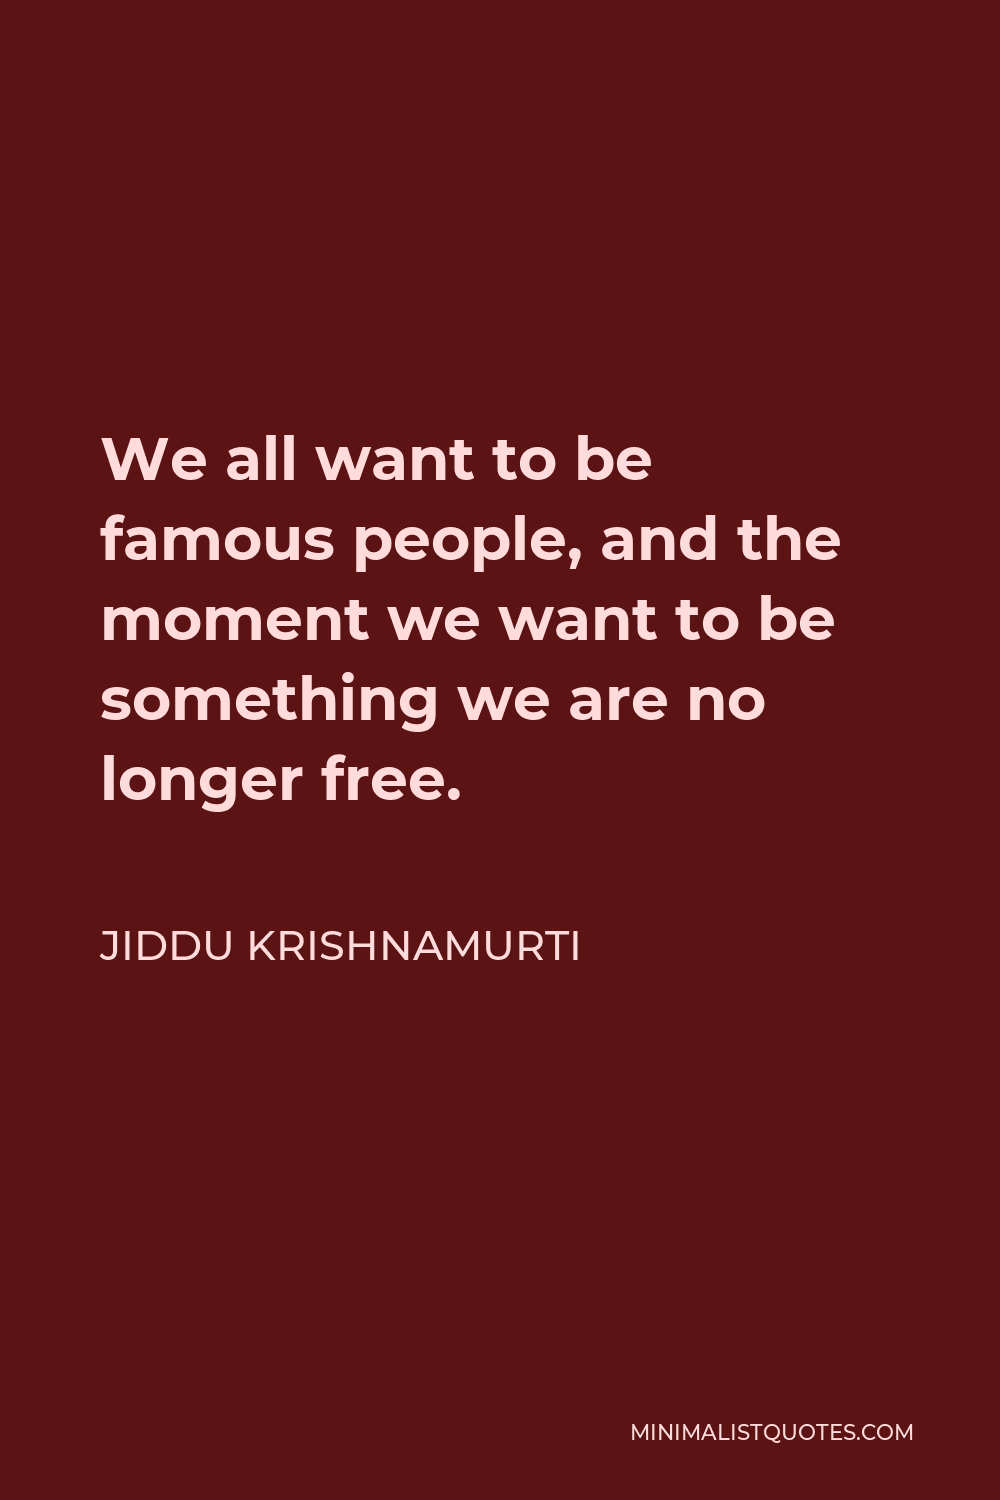 Jiddu Krishnamurti Quote - We all want to be famous people, and the moment we want to be something we are no longer free.